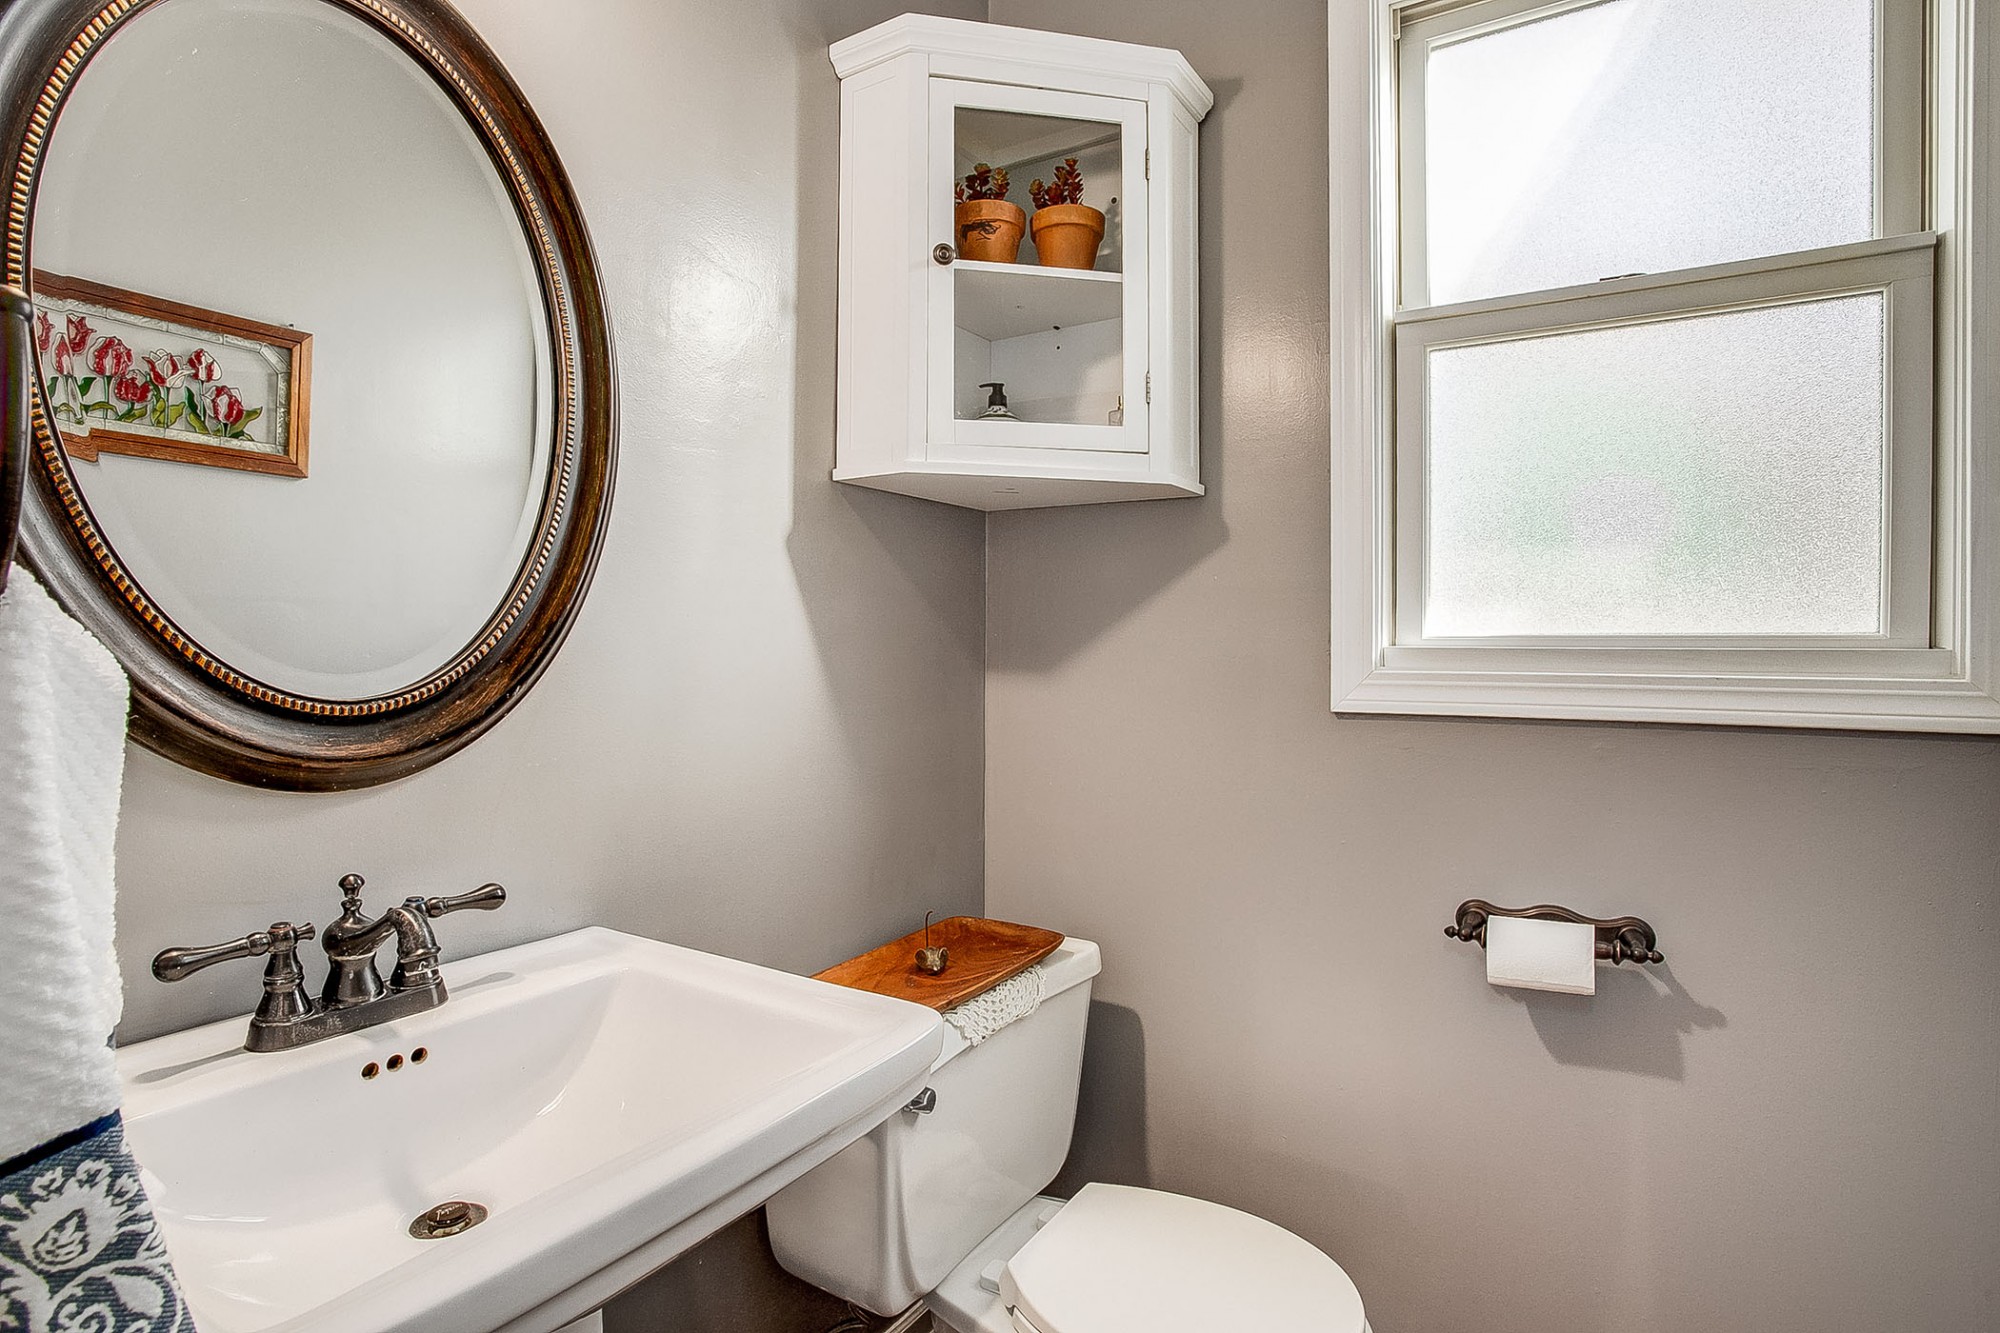 Delightful powder room for the convenience of your guests.